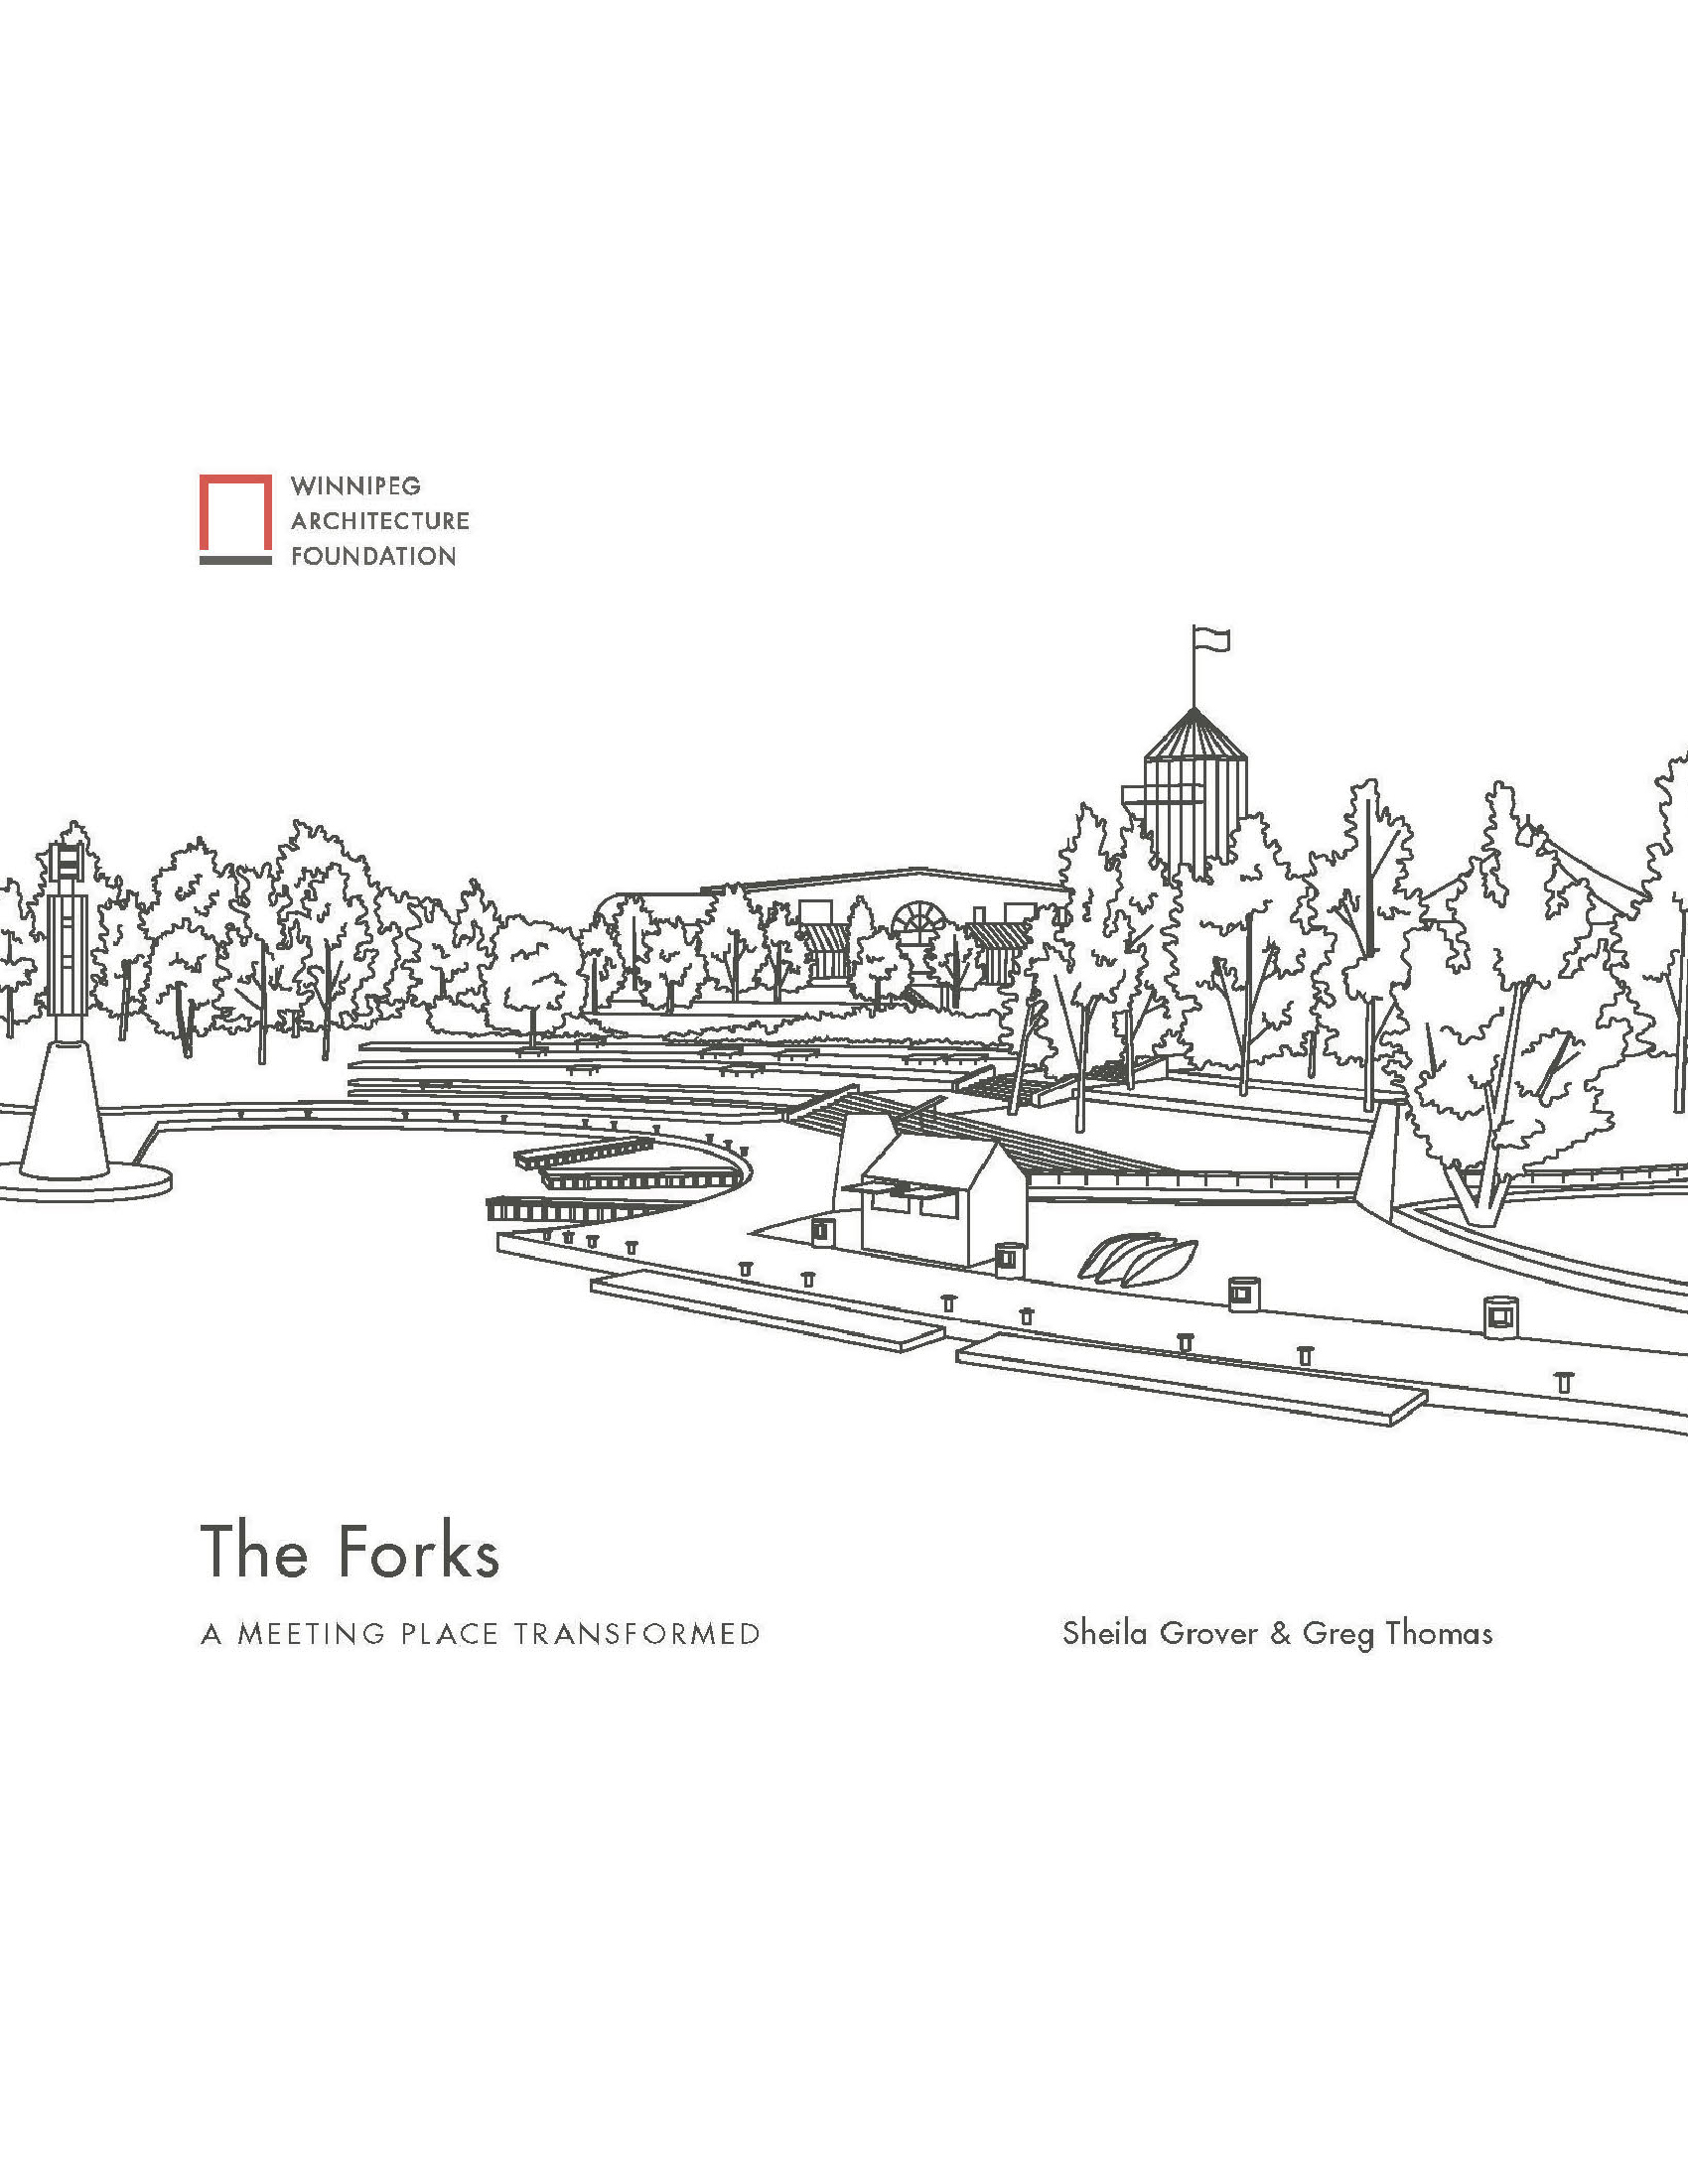 The Forks: A Meeting Place Transformed